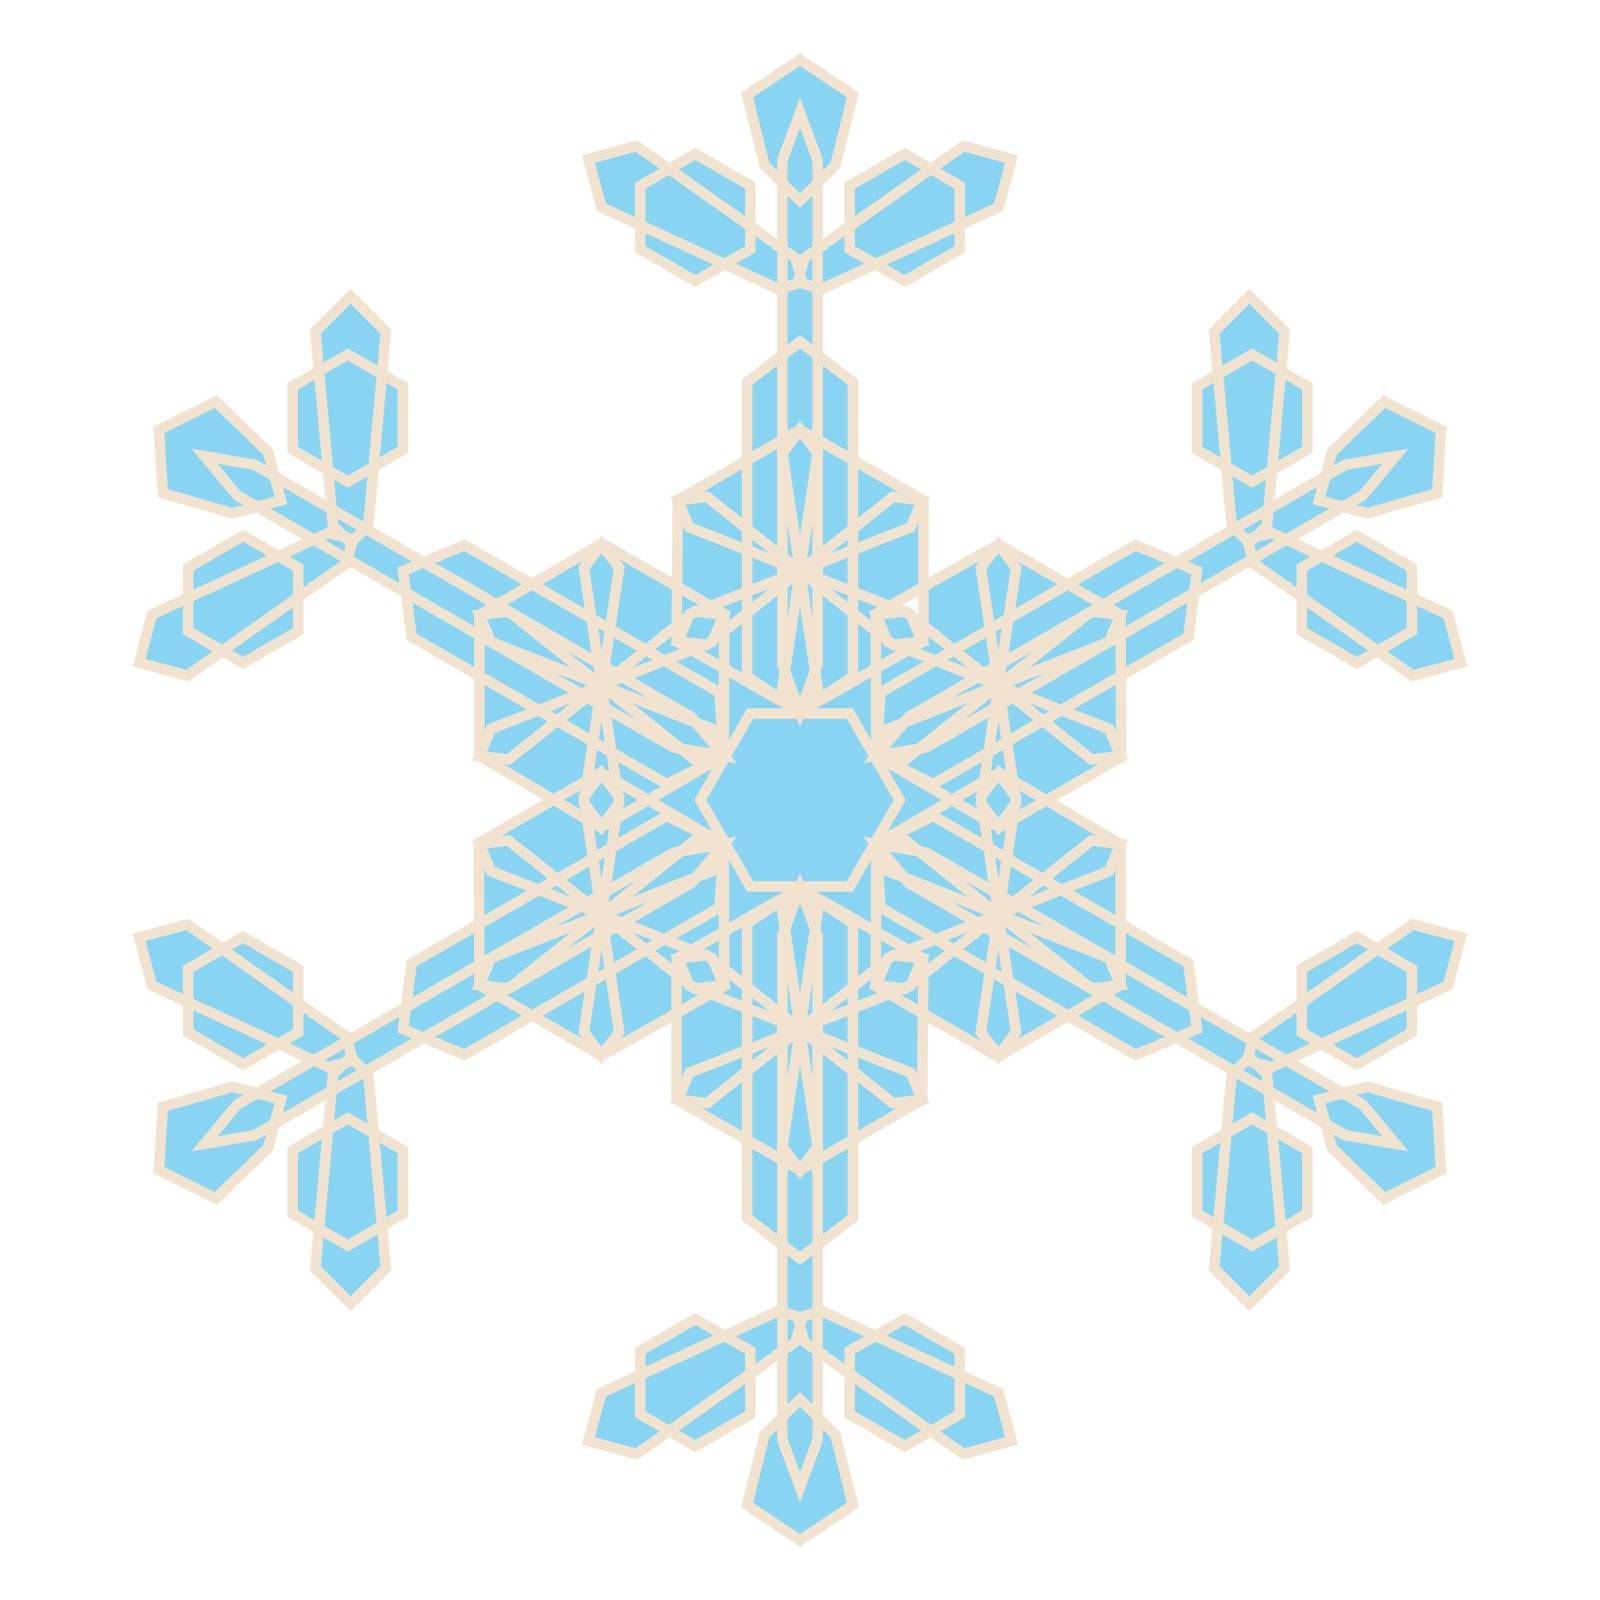 Crystal Snowflake for your design. EPS10 vector.